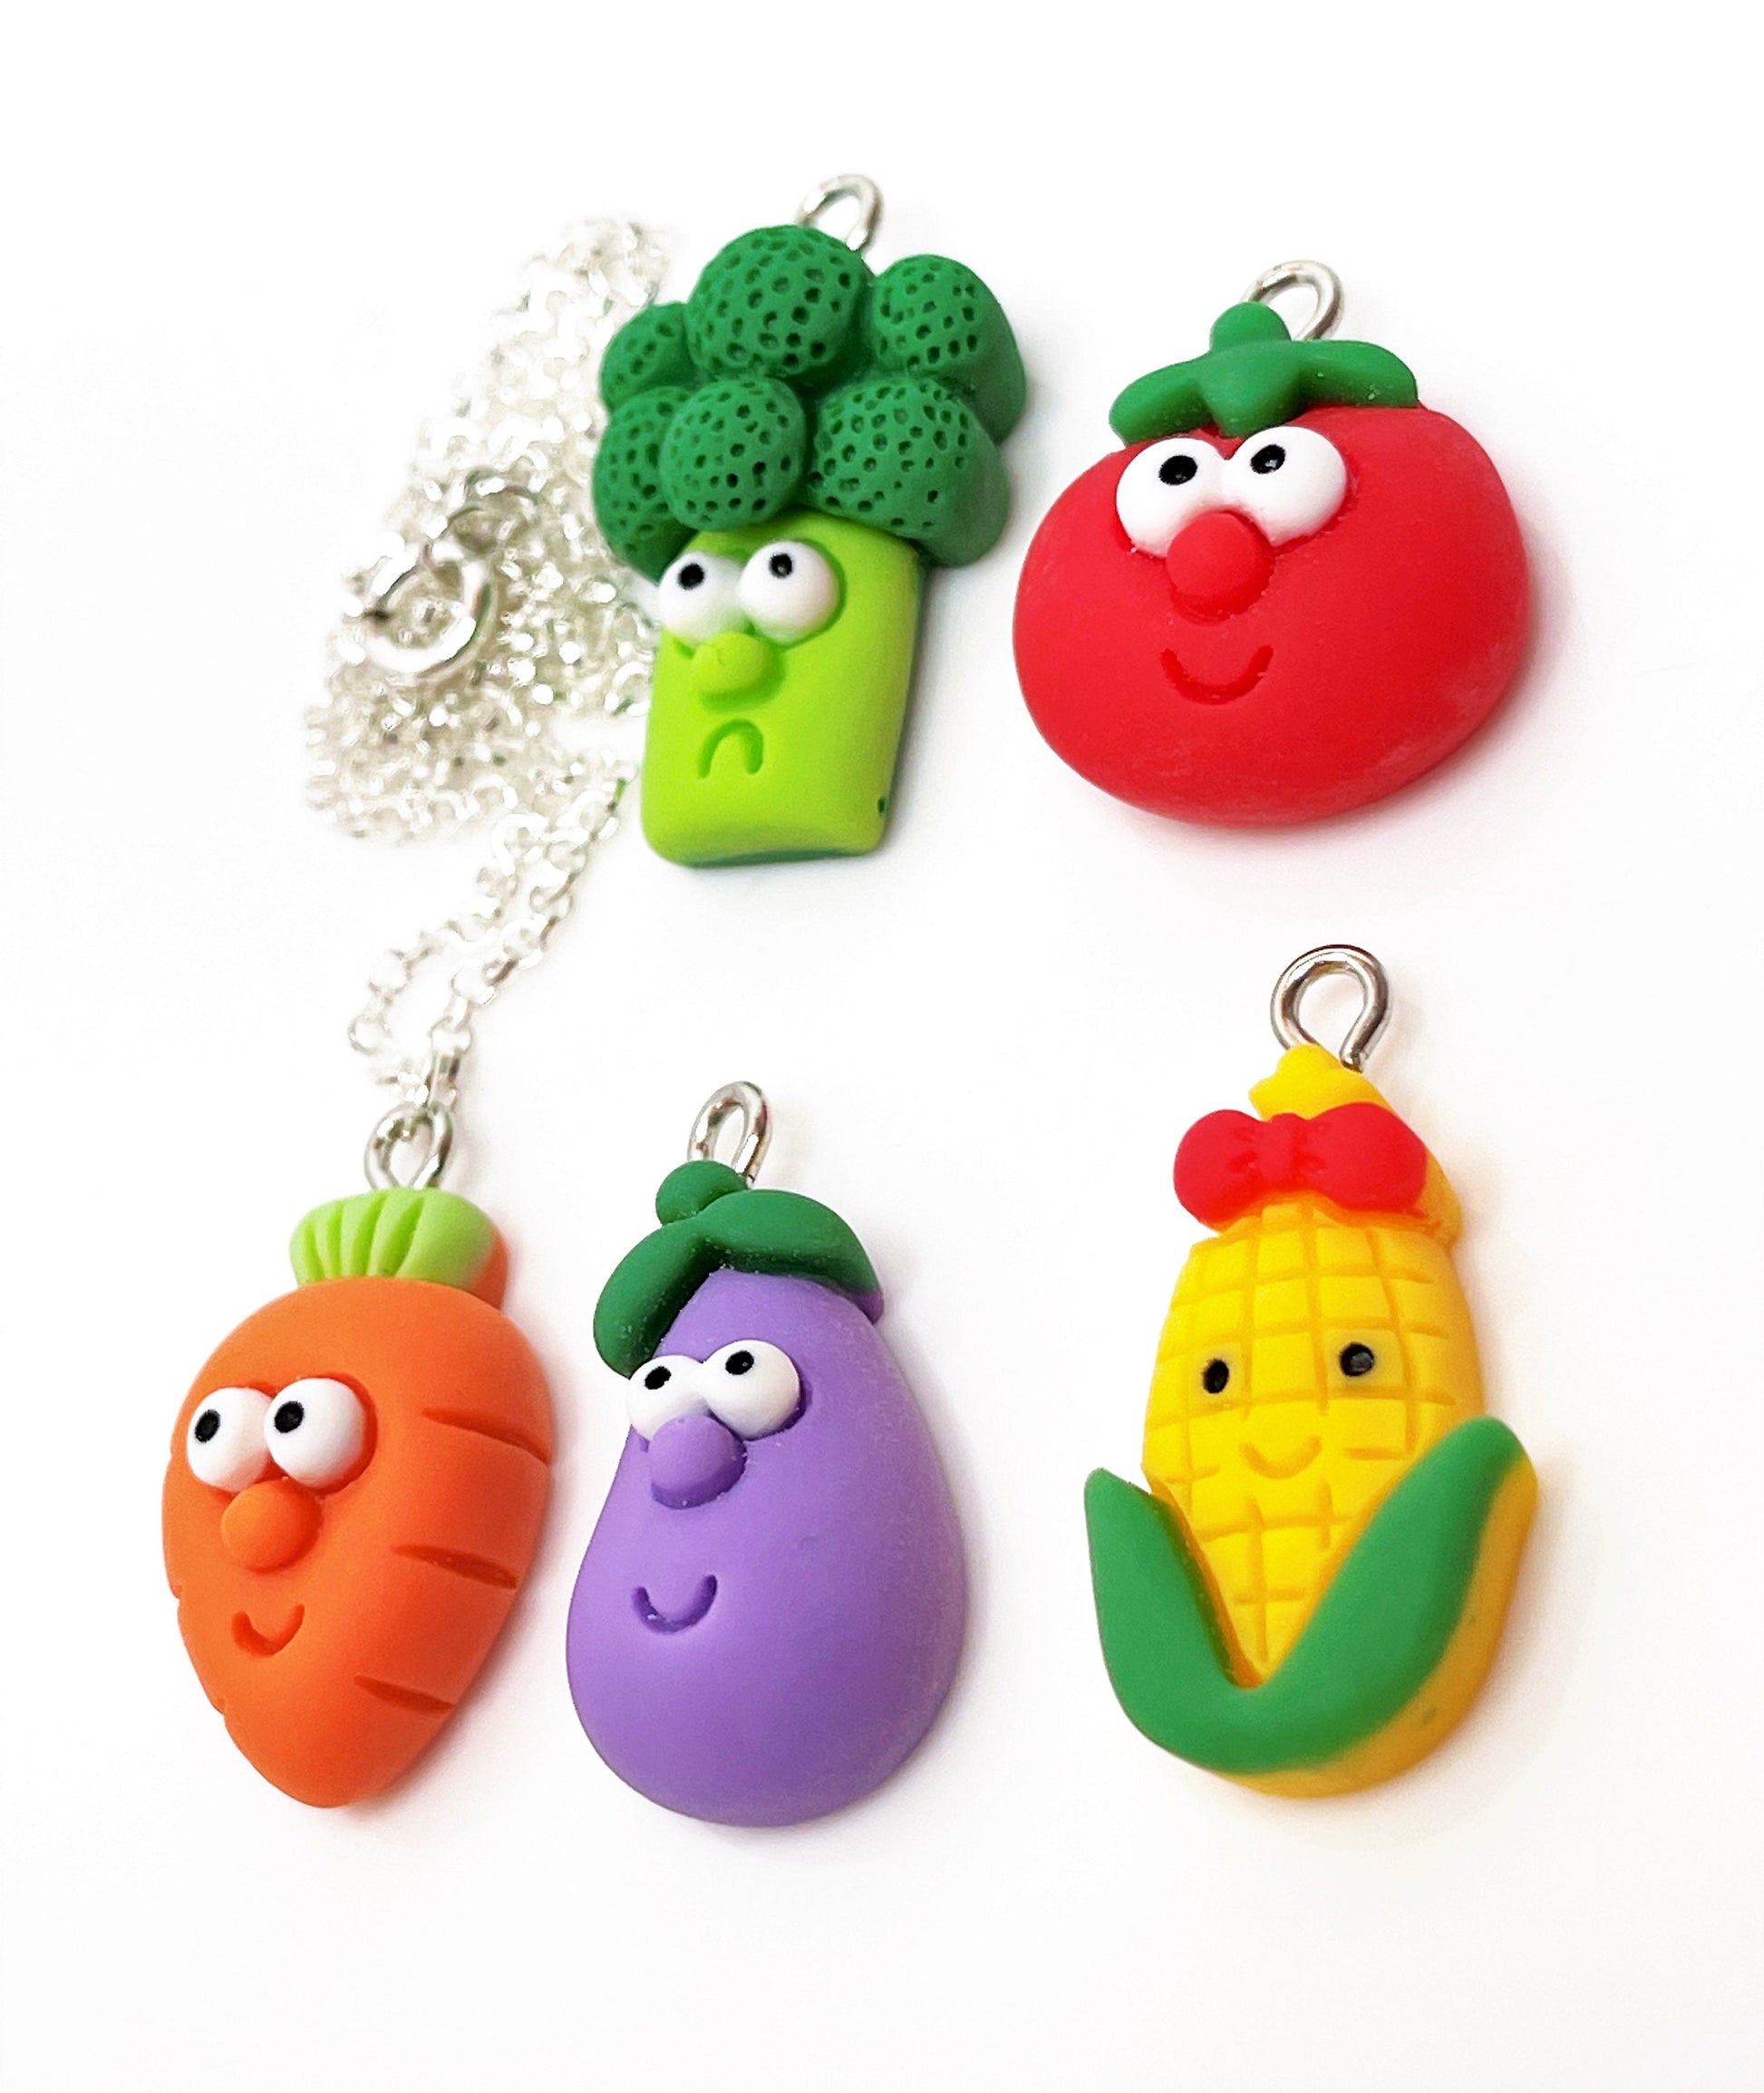 Vegetable Necklace, Silver Plated, Sterling Silver, Multi-colour Bead Necklace, Funky Food Jewellery, Necklaces for Women